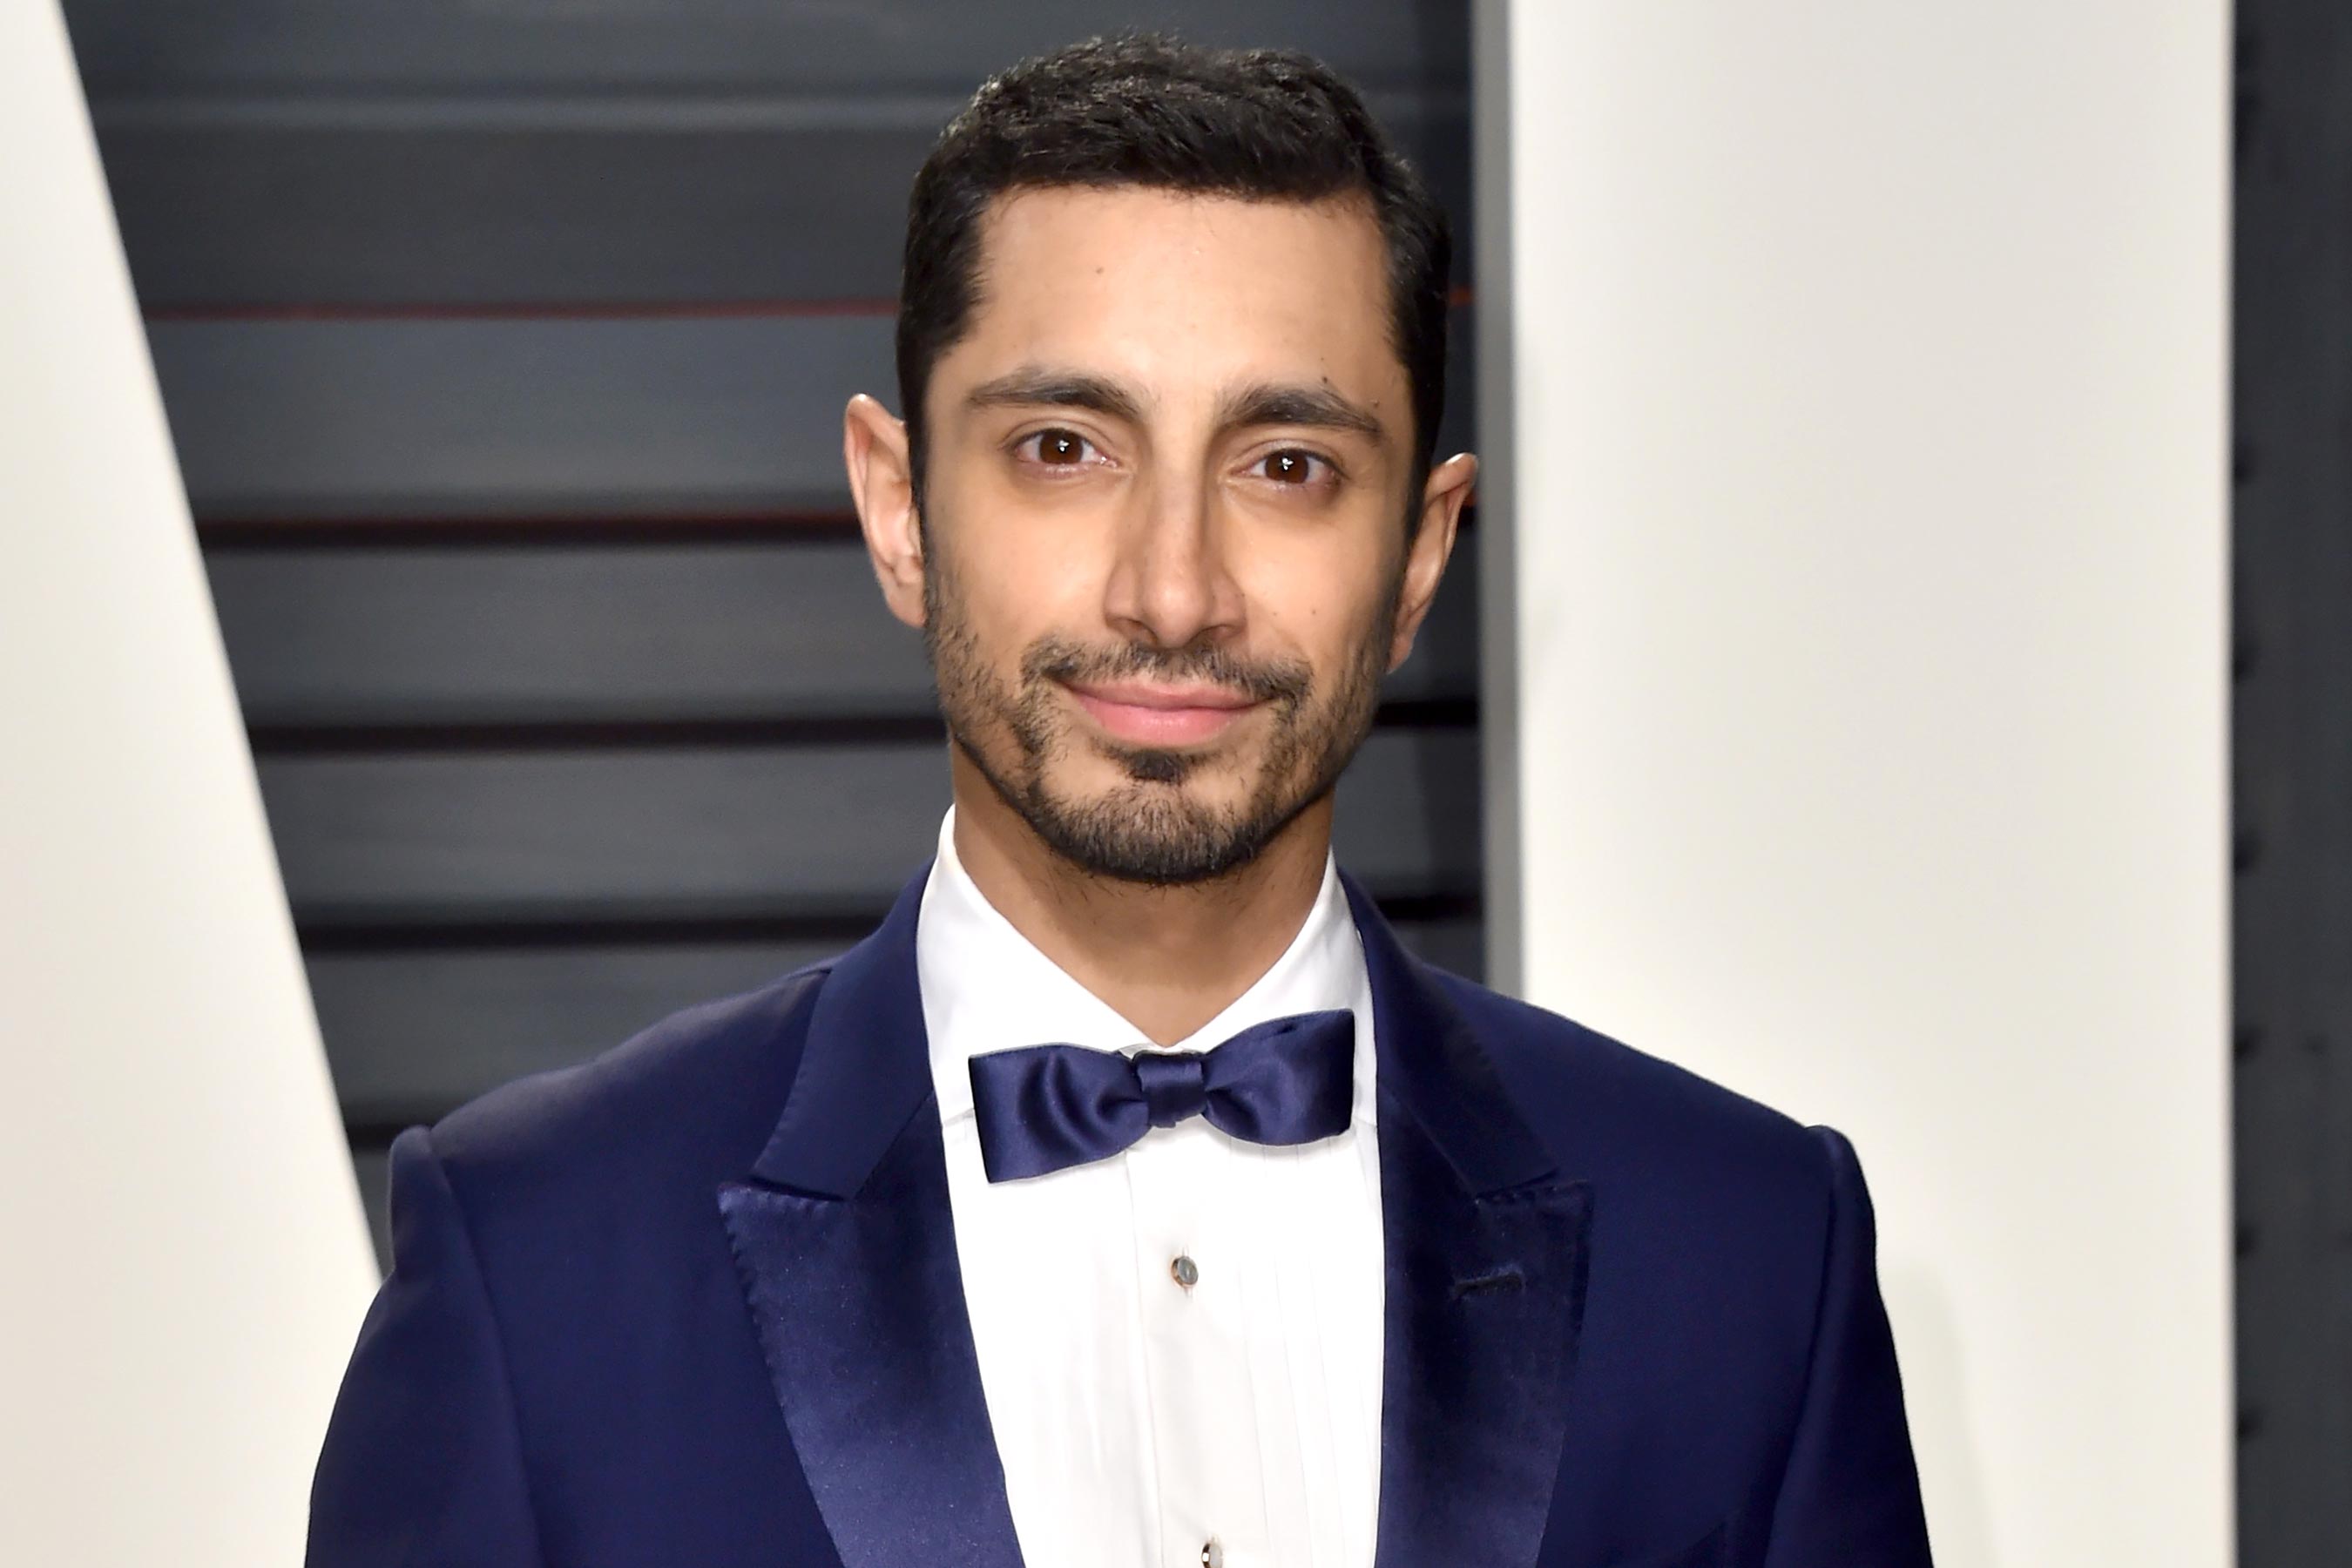 BEVERLY HILLS, CA - FEBRUARY 26:  Actor Riz Ahmed attends the 2017 Vanity Fair Oscar Party hosted by Graydon Carter at Wallis Annenberg Center for the Performing Arts on February 26, 2017 in Beverly Hills, California.  (Photo by Alberto E. Rodriguez/WireImage)